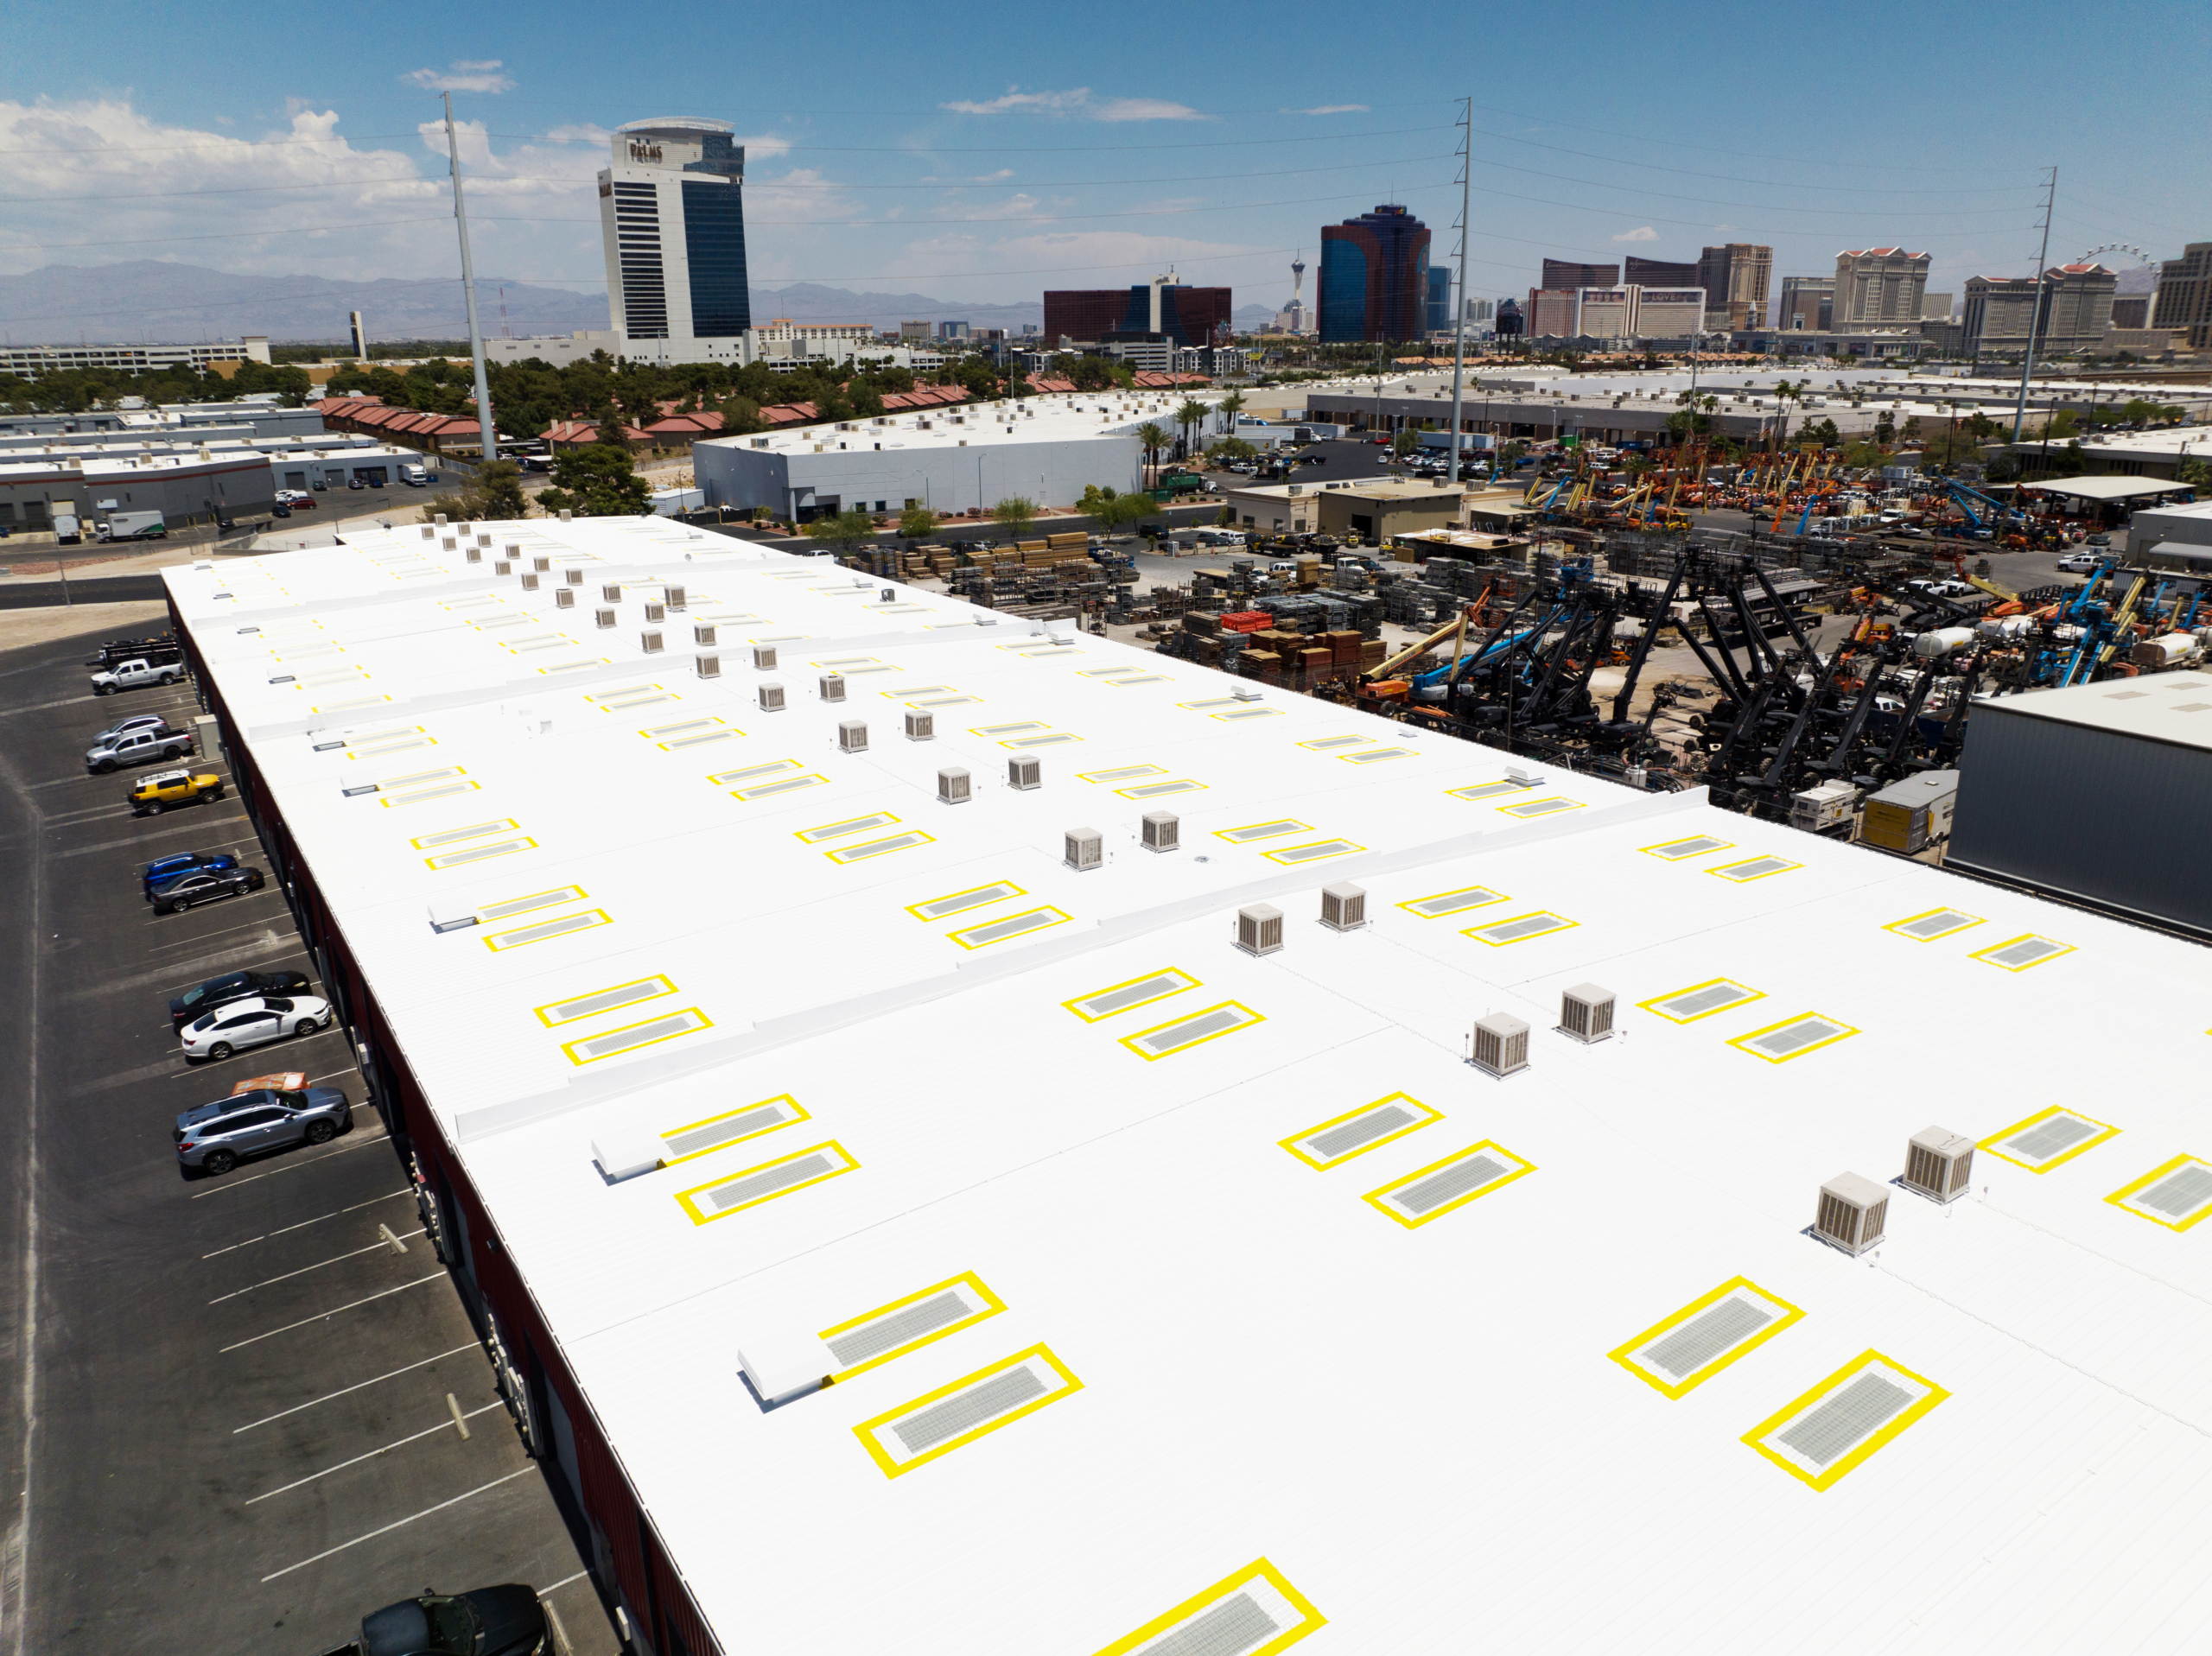 Aerial view of a large white warehouse roof with skylights and air conditioning units. Several buildings, parking lots, and a cityscape with tall buildings are visible in the background.